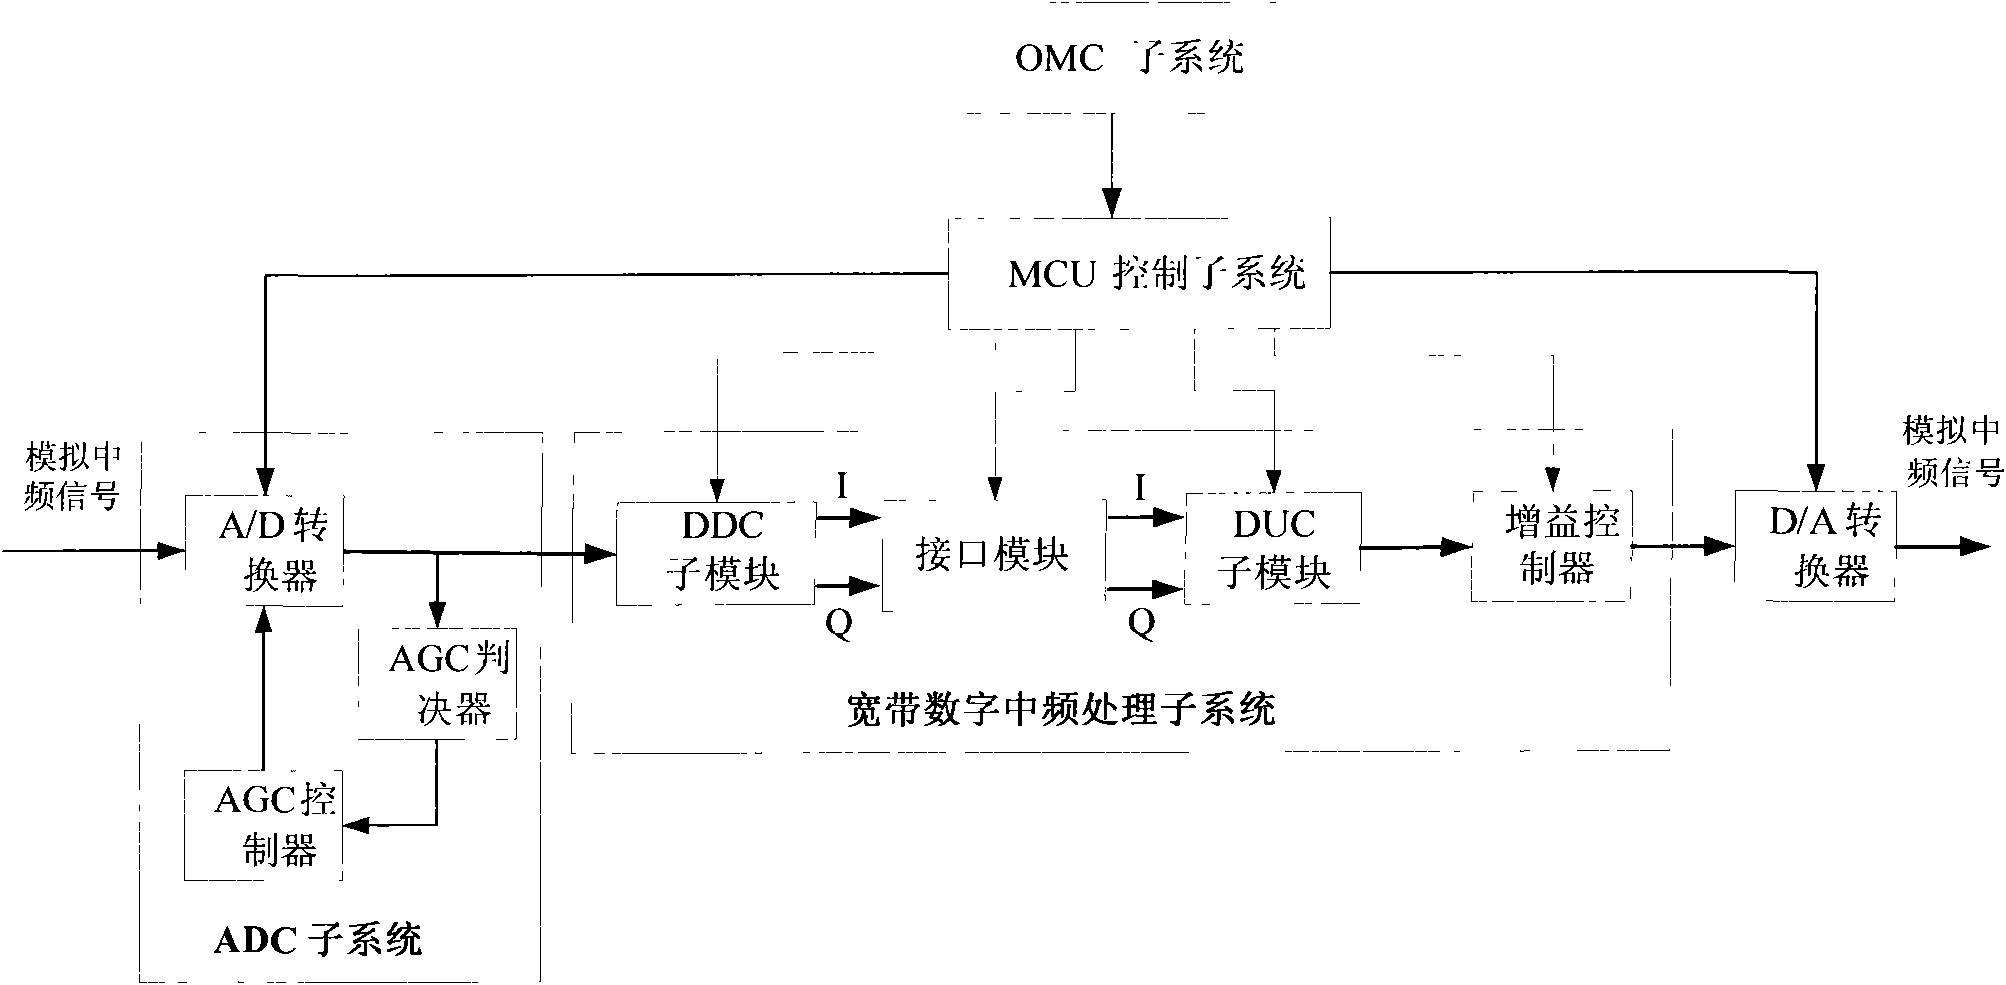 Wideband signal digital frequency selecting system with self-adaptive bandwidth adjustment and signal processing method